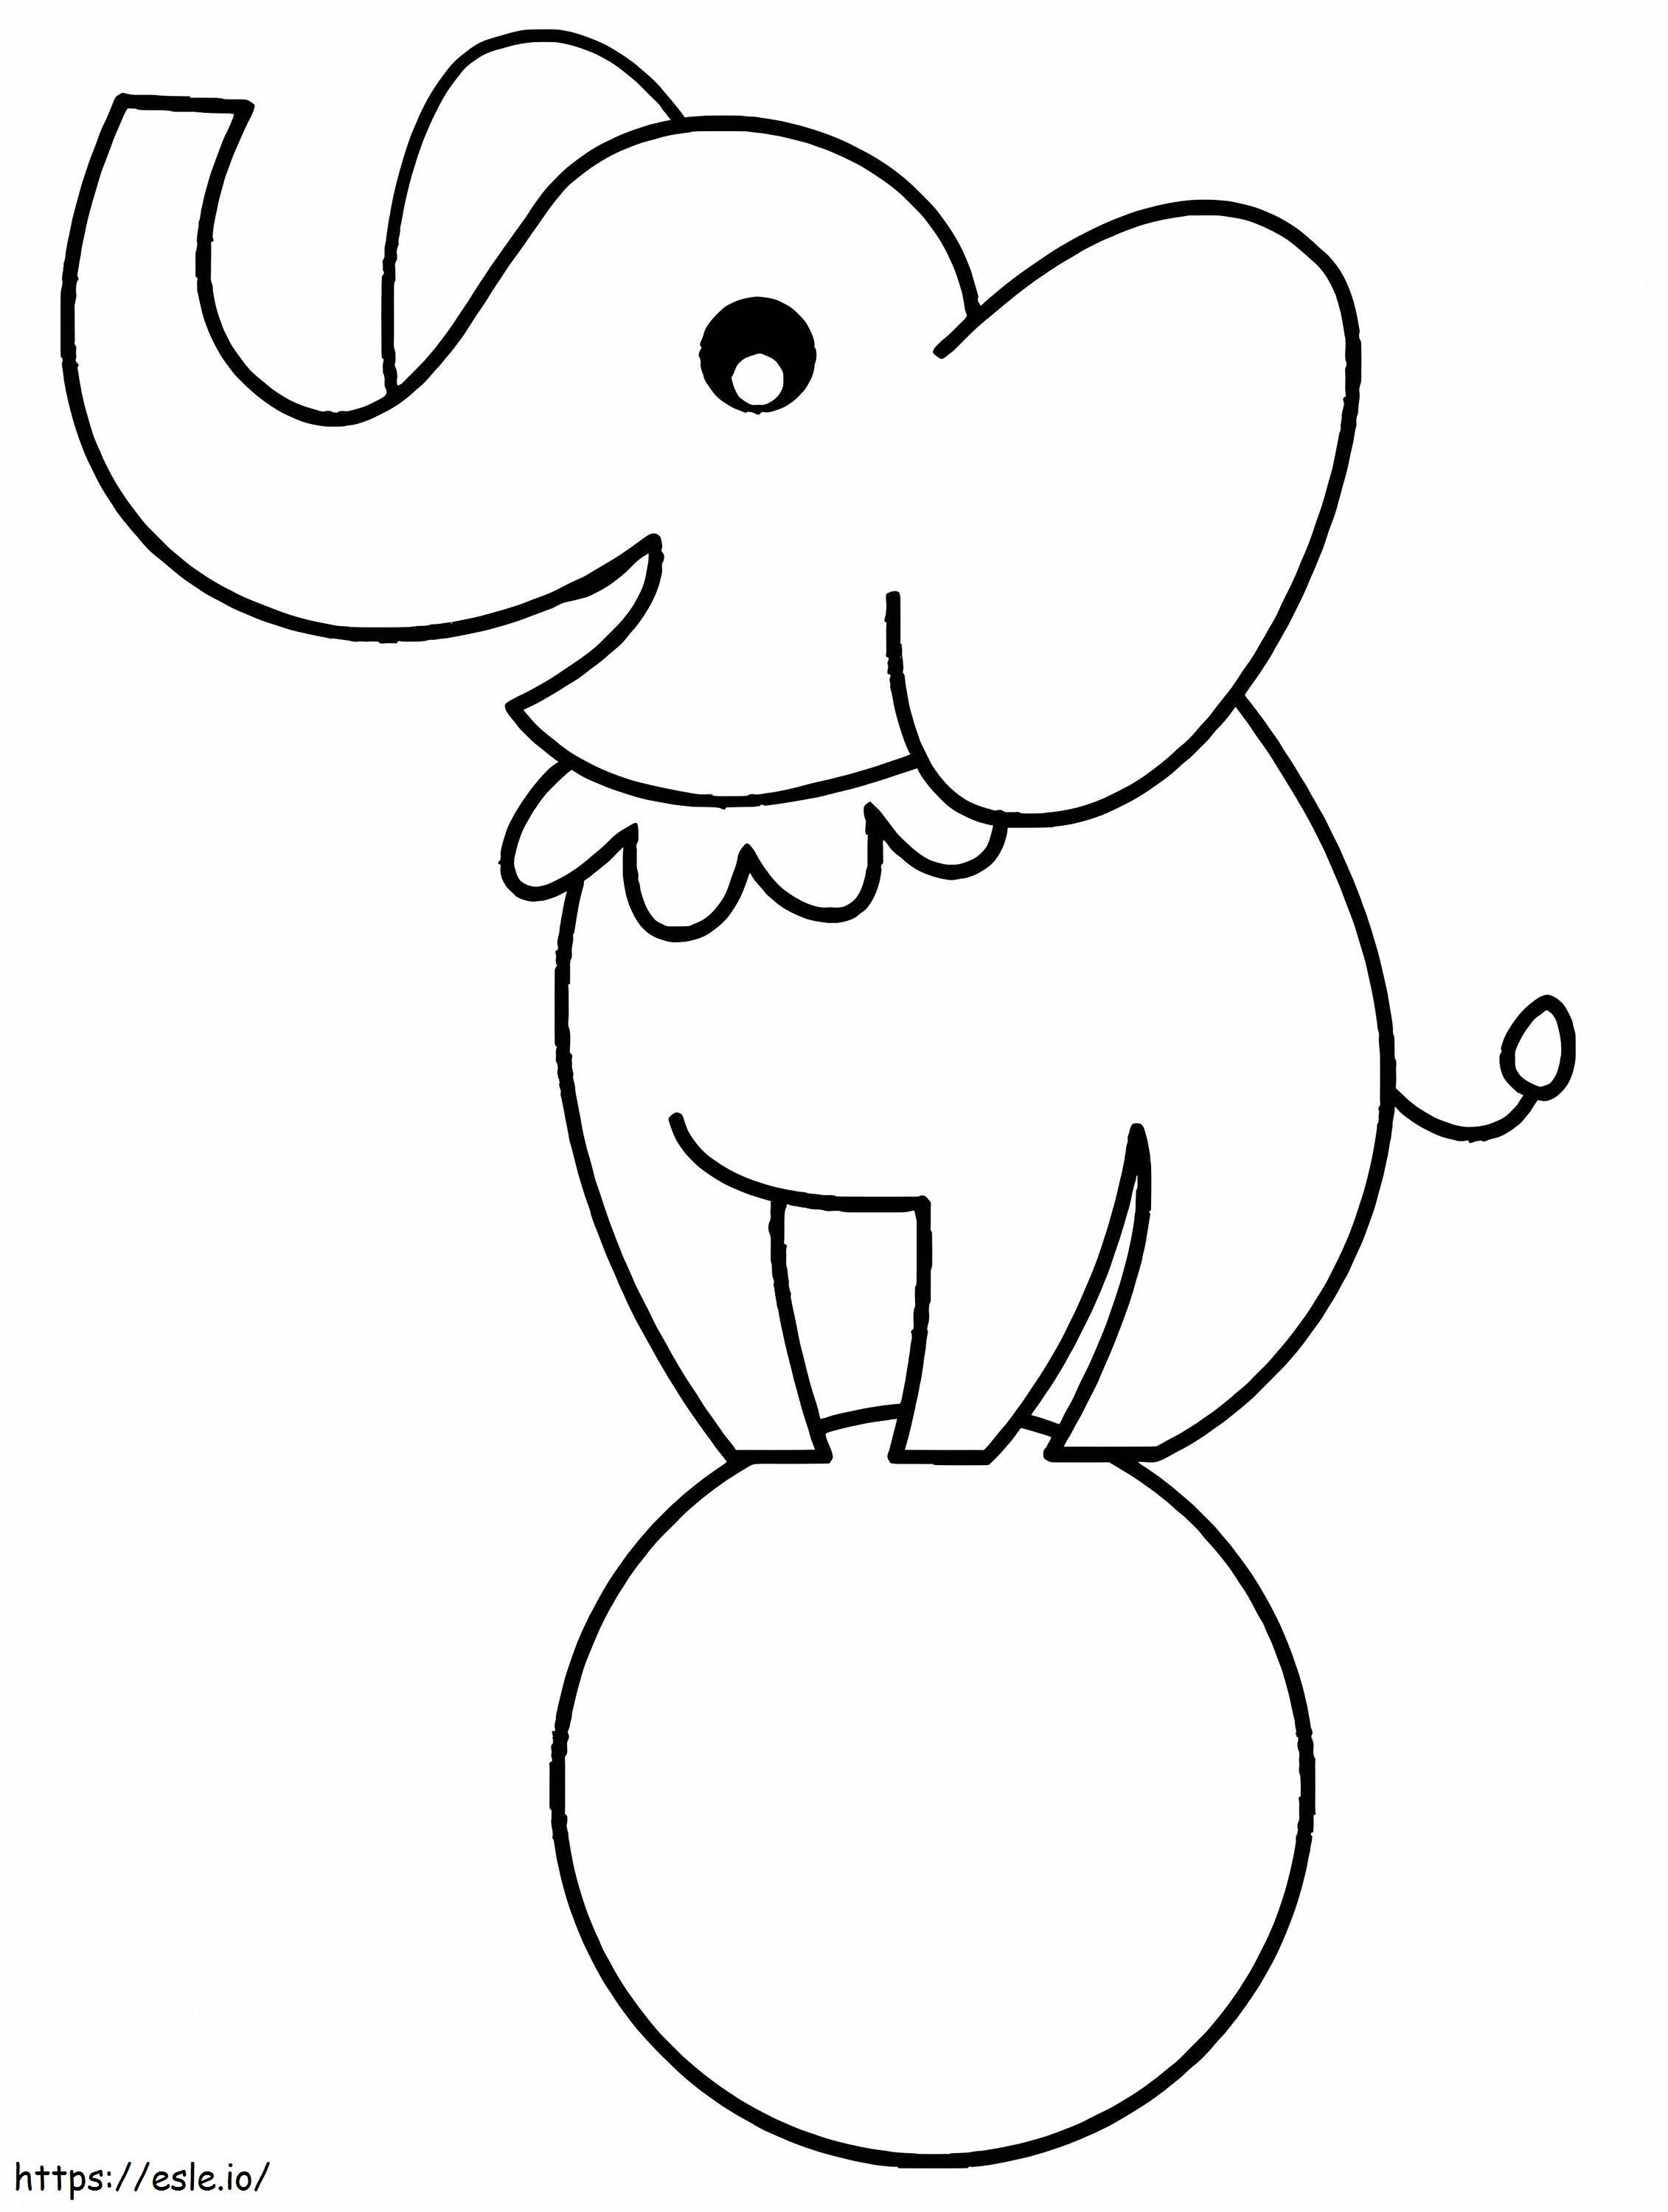 Cute Elephant For 1 Year Old Kids coloring page